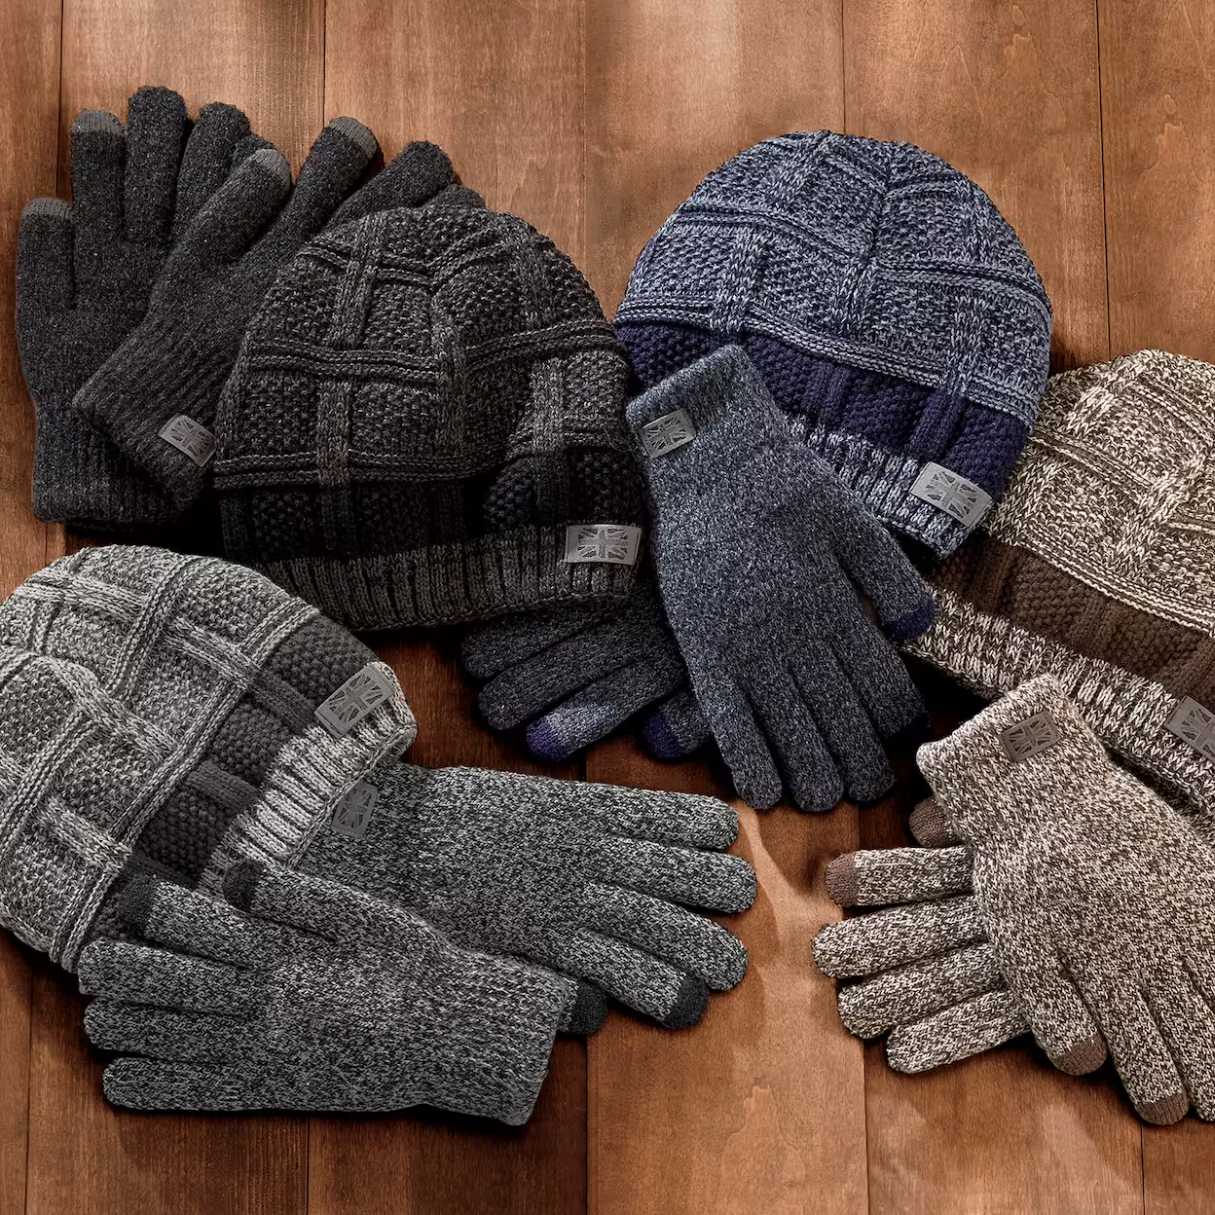 How To Store Hats And Gloves